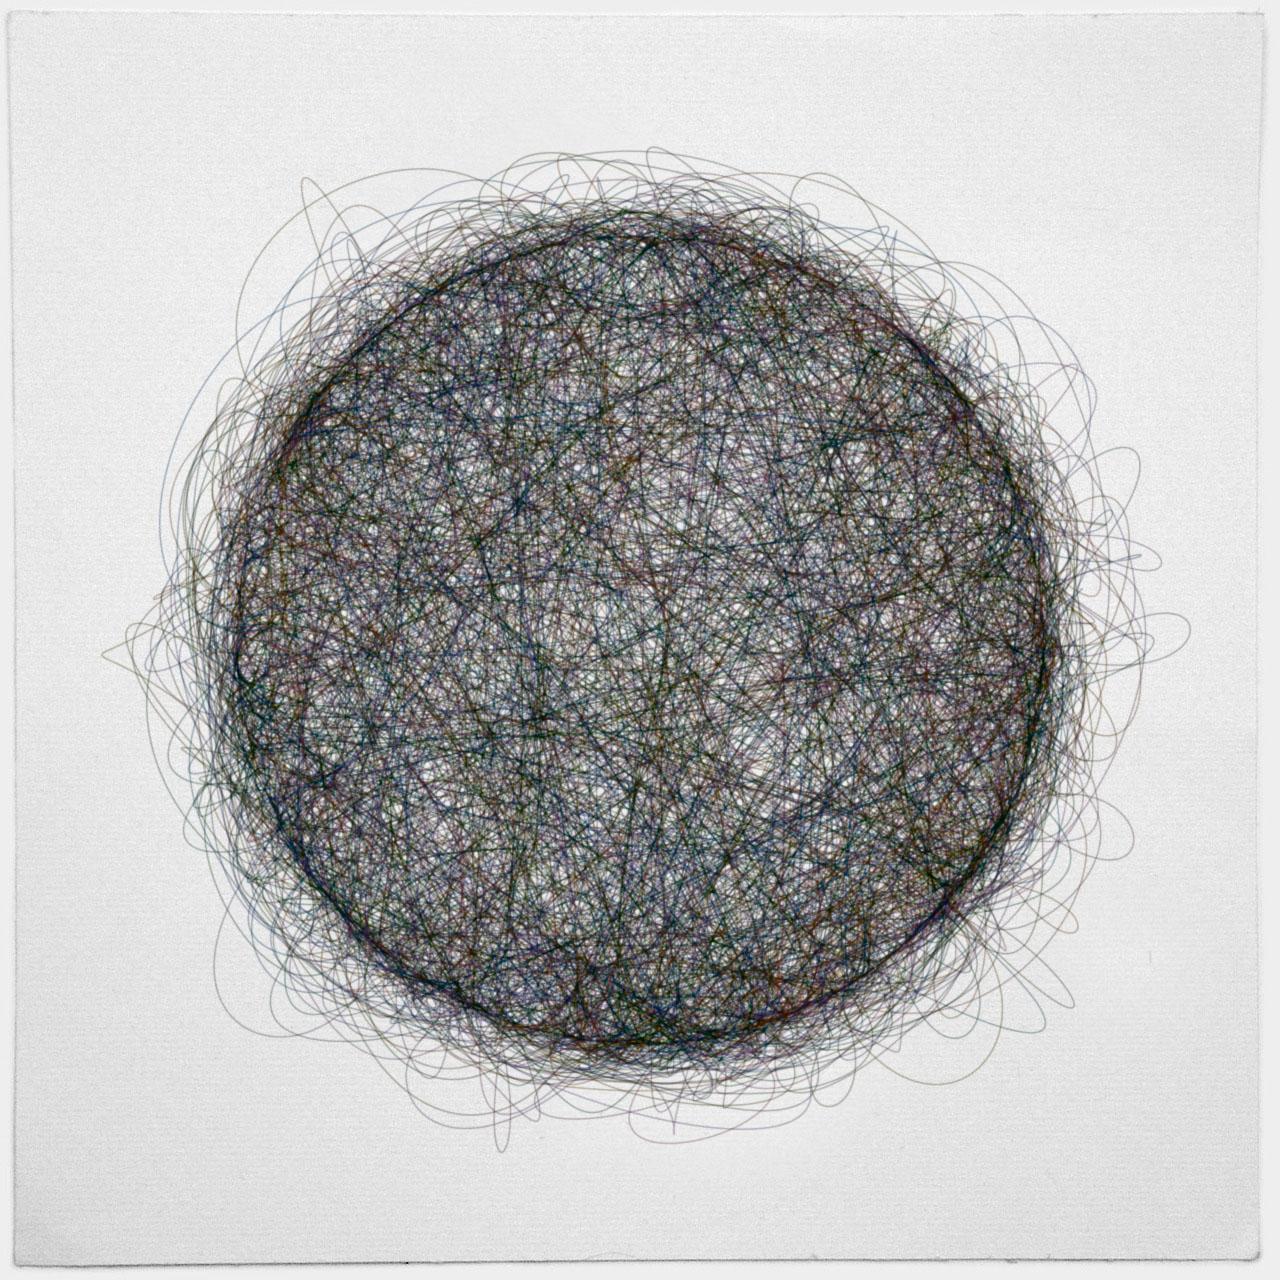 #generative #art and design made with #code (#processing) at http://thedotisblack.tumblr.com http://t.co/O0AA7evgwp